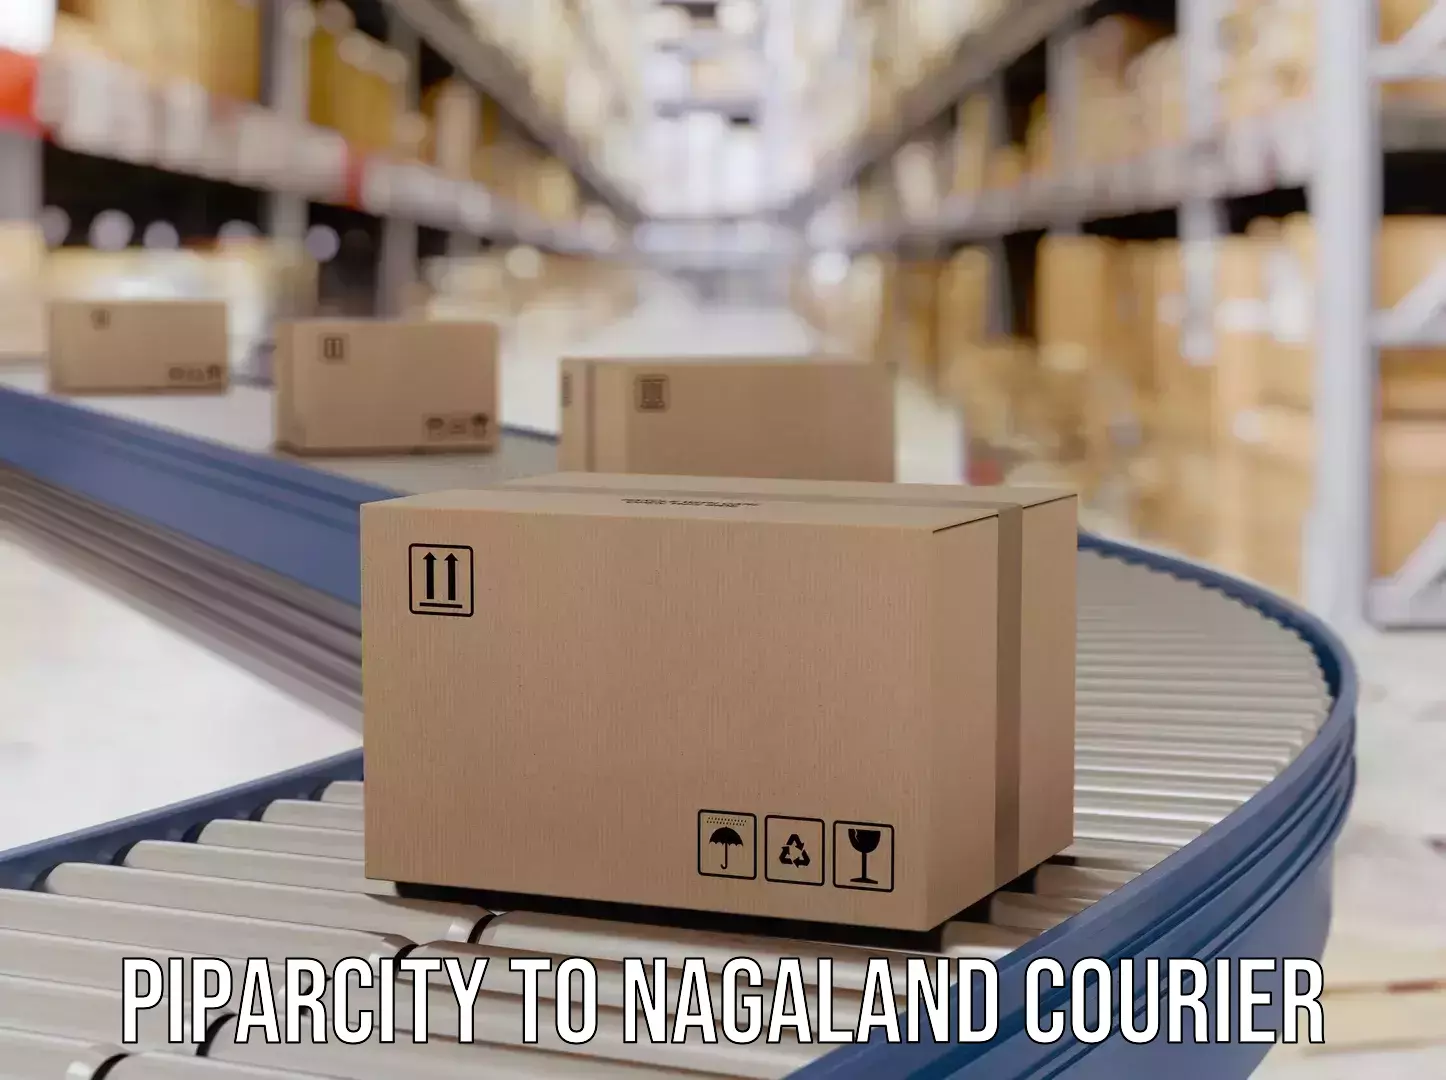 Pharmaceutical courier Piparcity to Nagaland